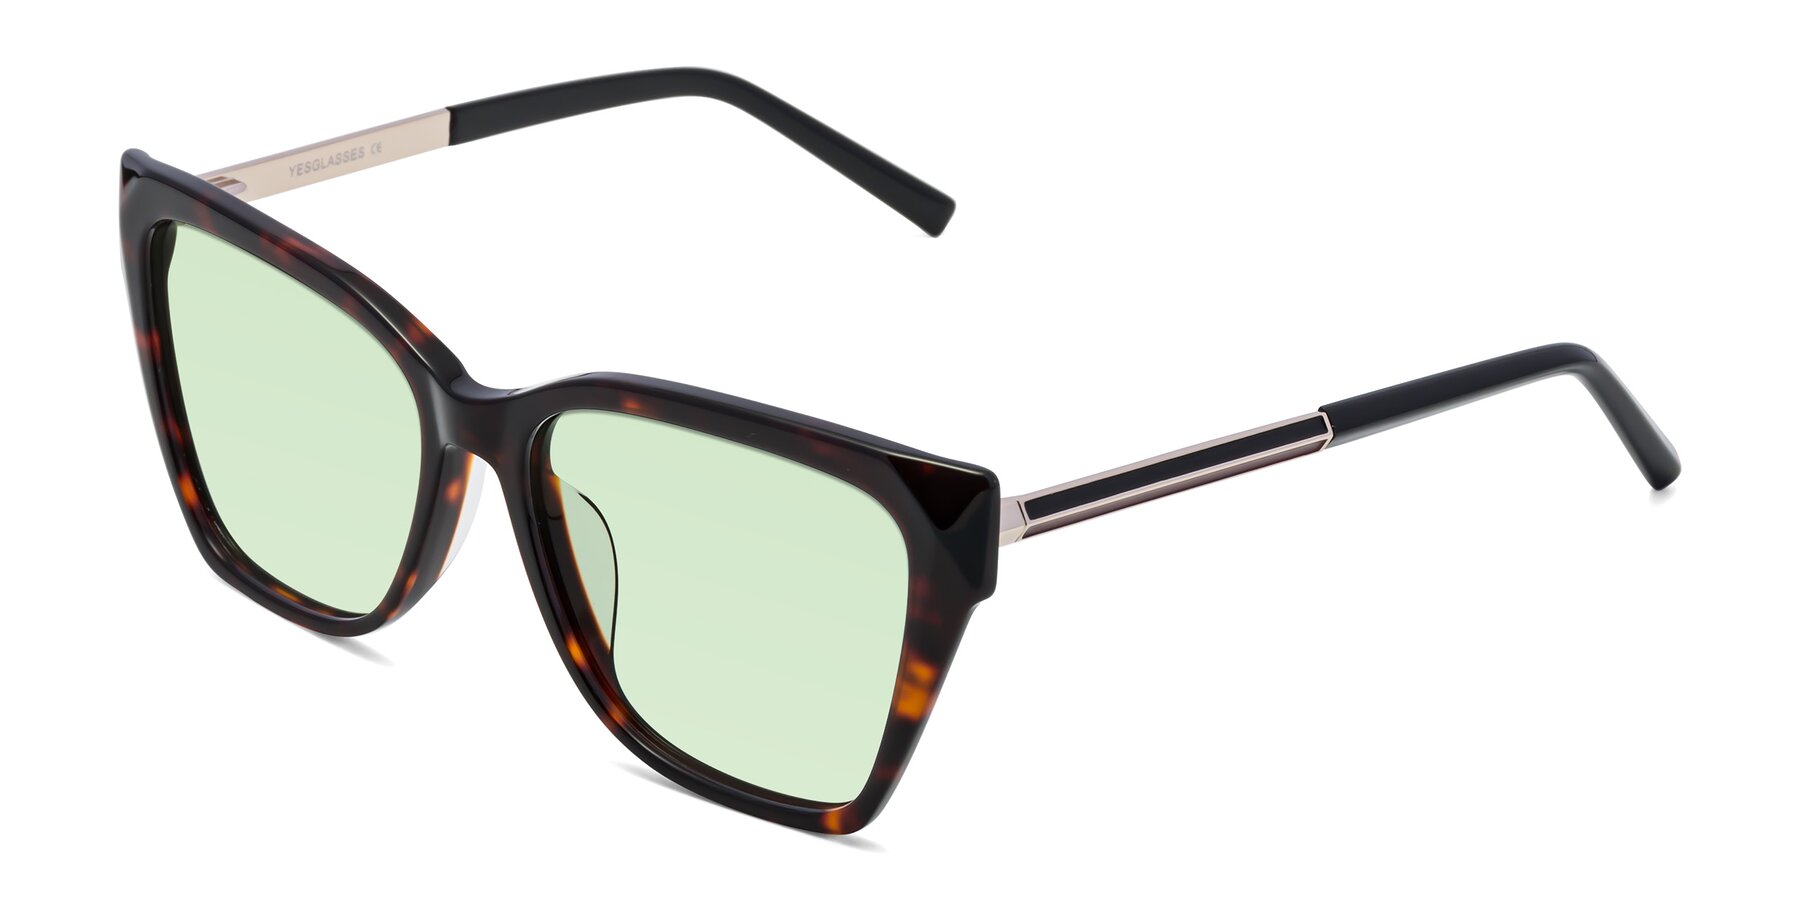 Angle of Swartz in Tortoise with Light Green Tinted Lenses